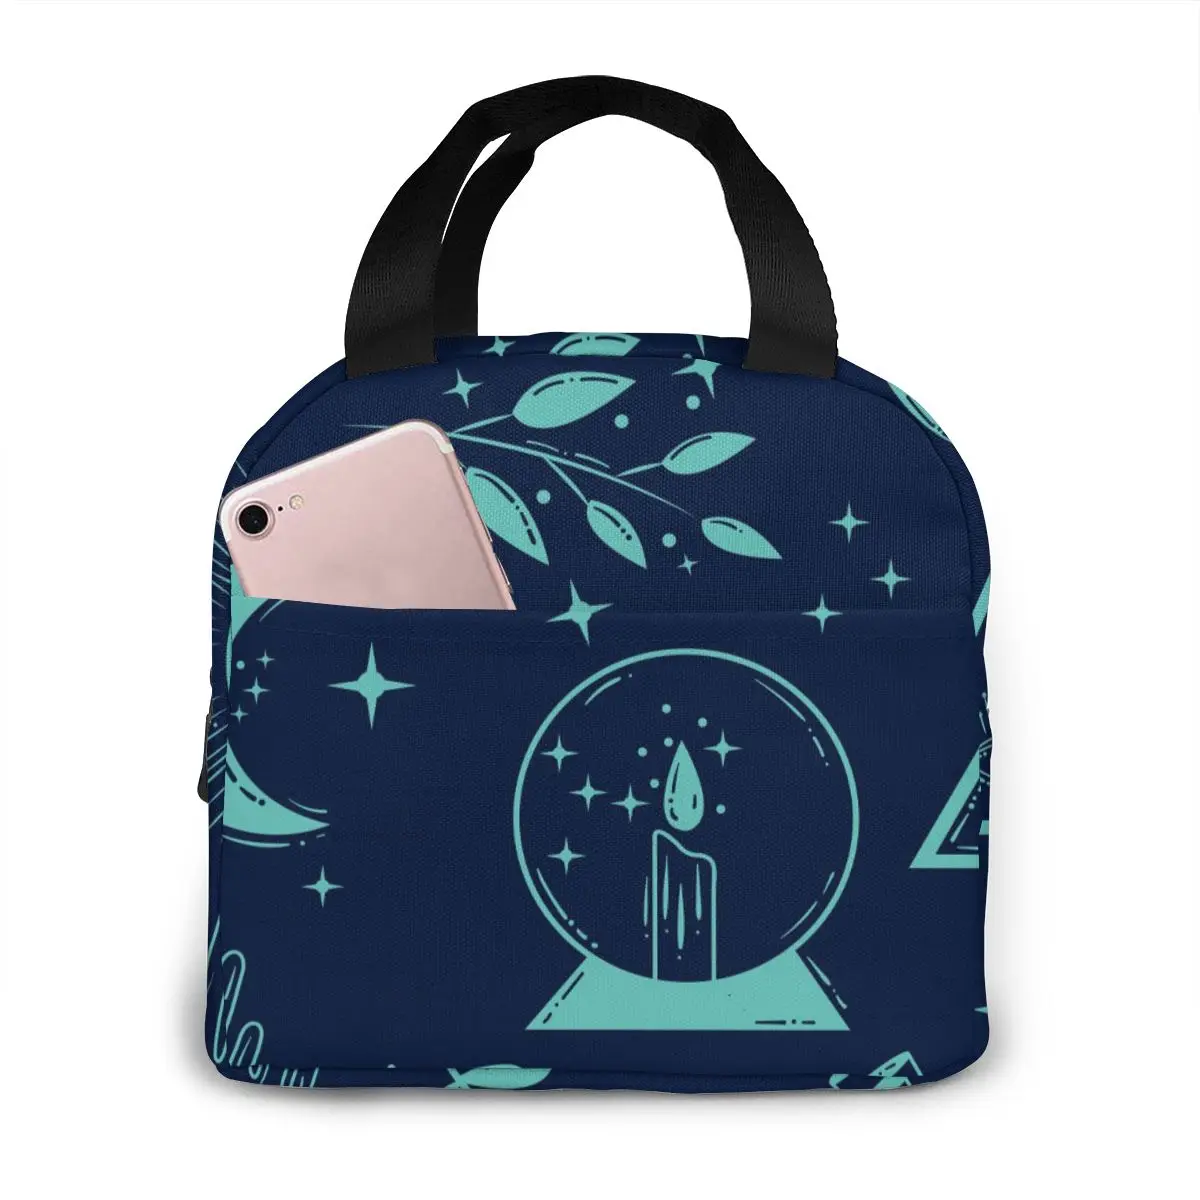 

Insulated Lunch Bag Thermal Esoteric Elements Tote Bags Cooler Picnic Food Lunch Box Bag